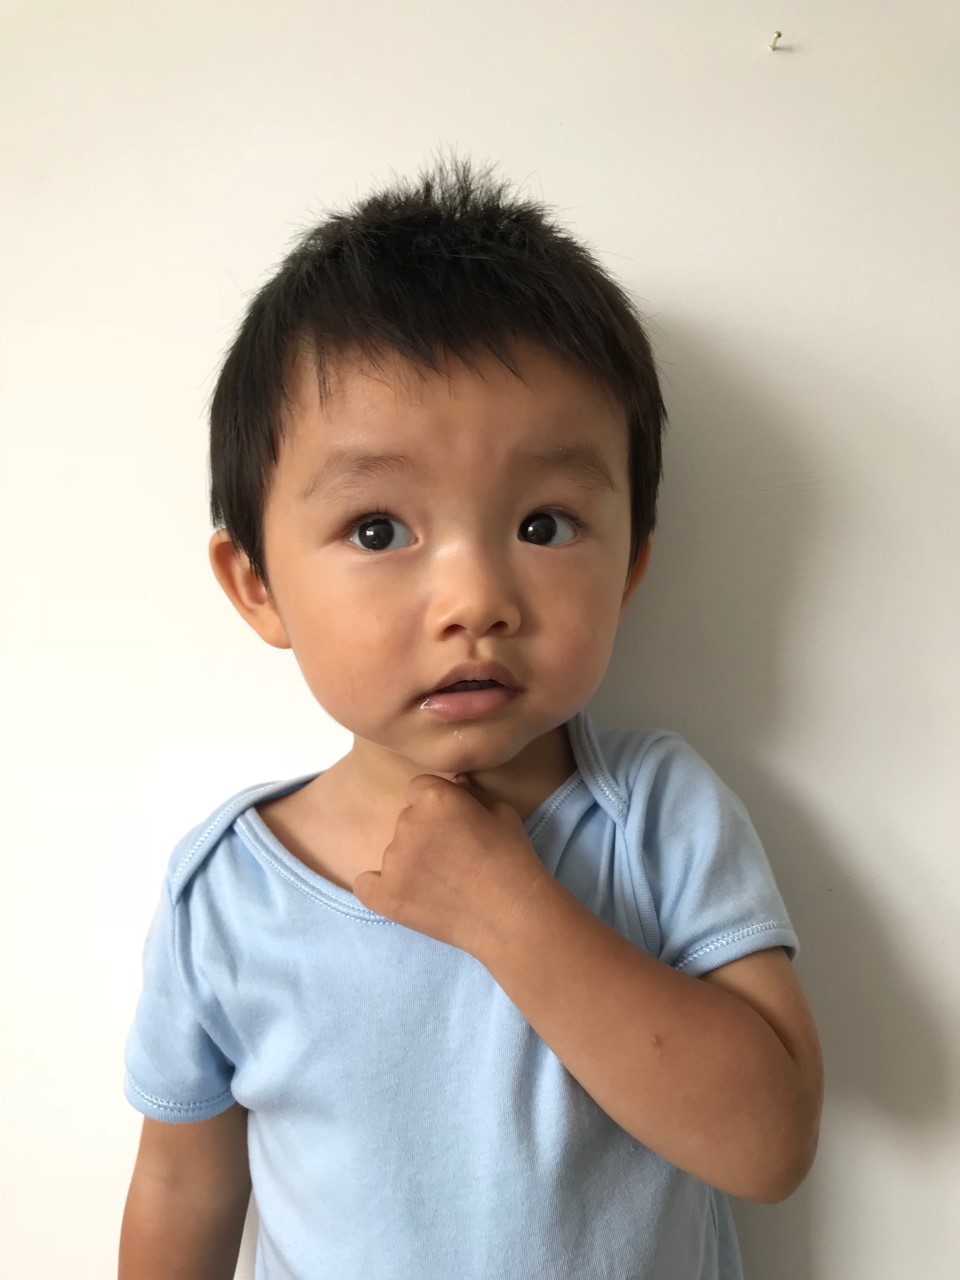 How-To-Get-Into-Child-Modelling-UK-Isaac-Lam